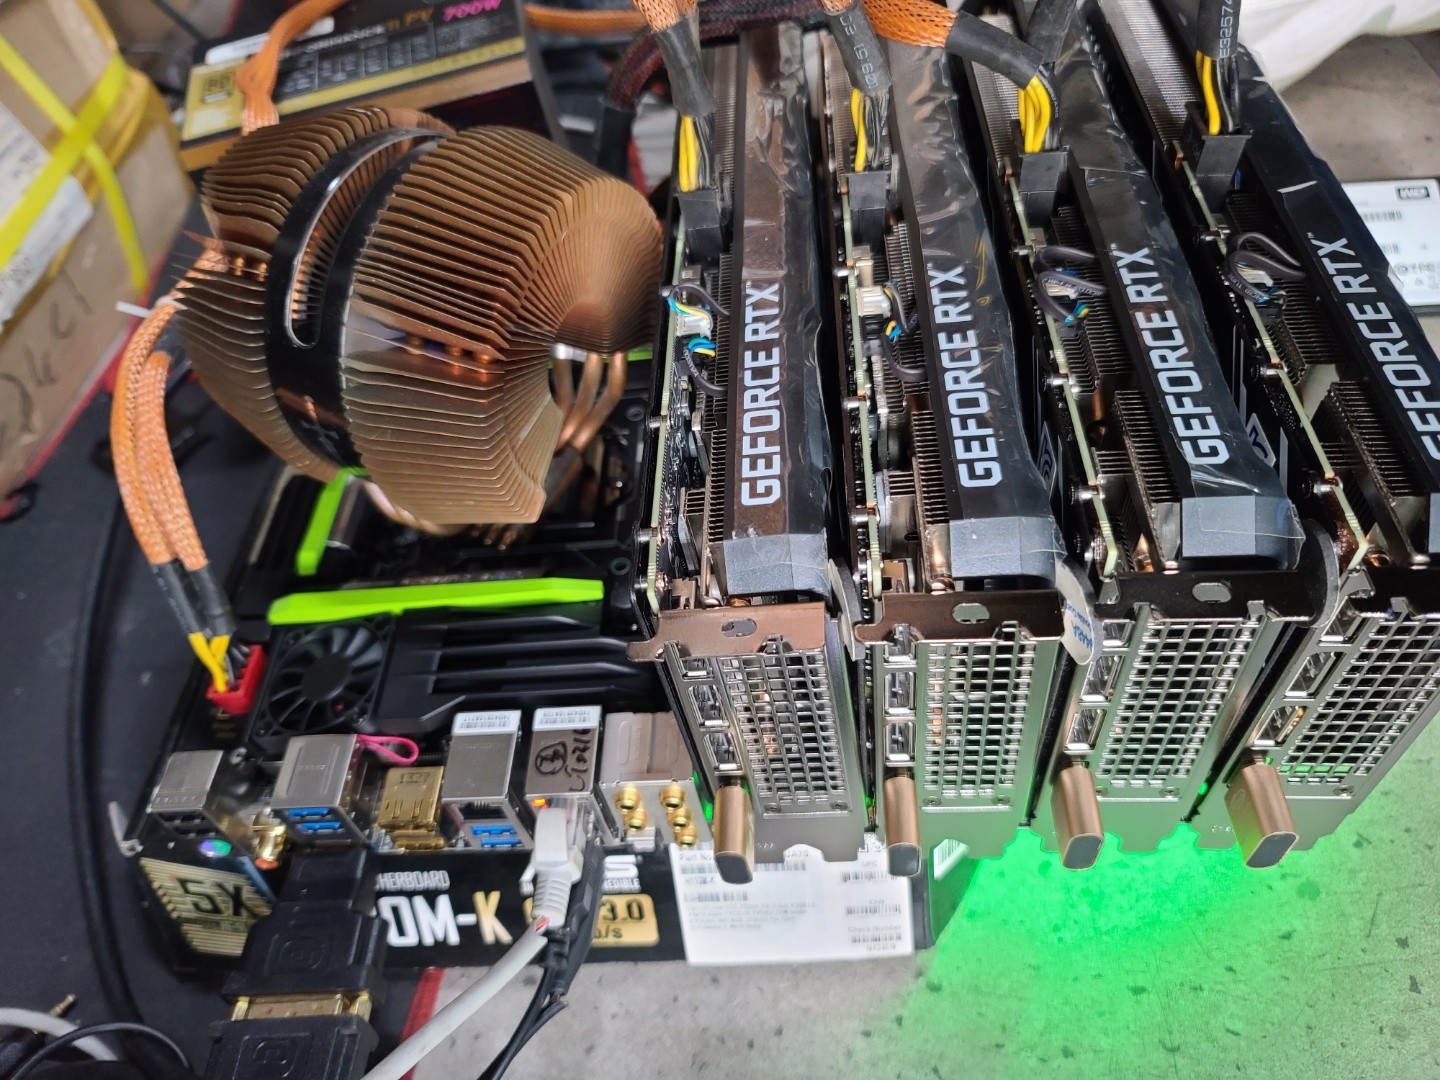 nvidia-geforce-rtx-3060-cryptocurrency-mining-gpu-hash-rate-limit-bypass-using-dummy-hdmi-1.jpg